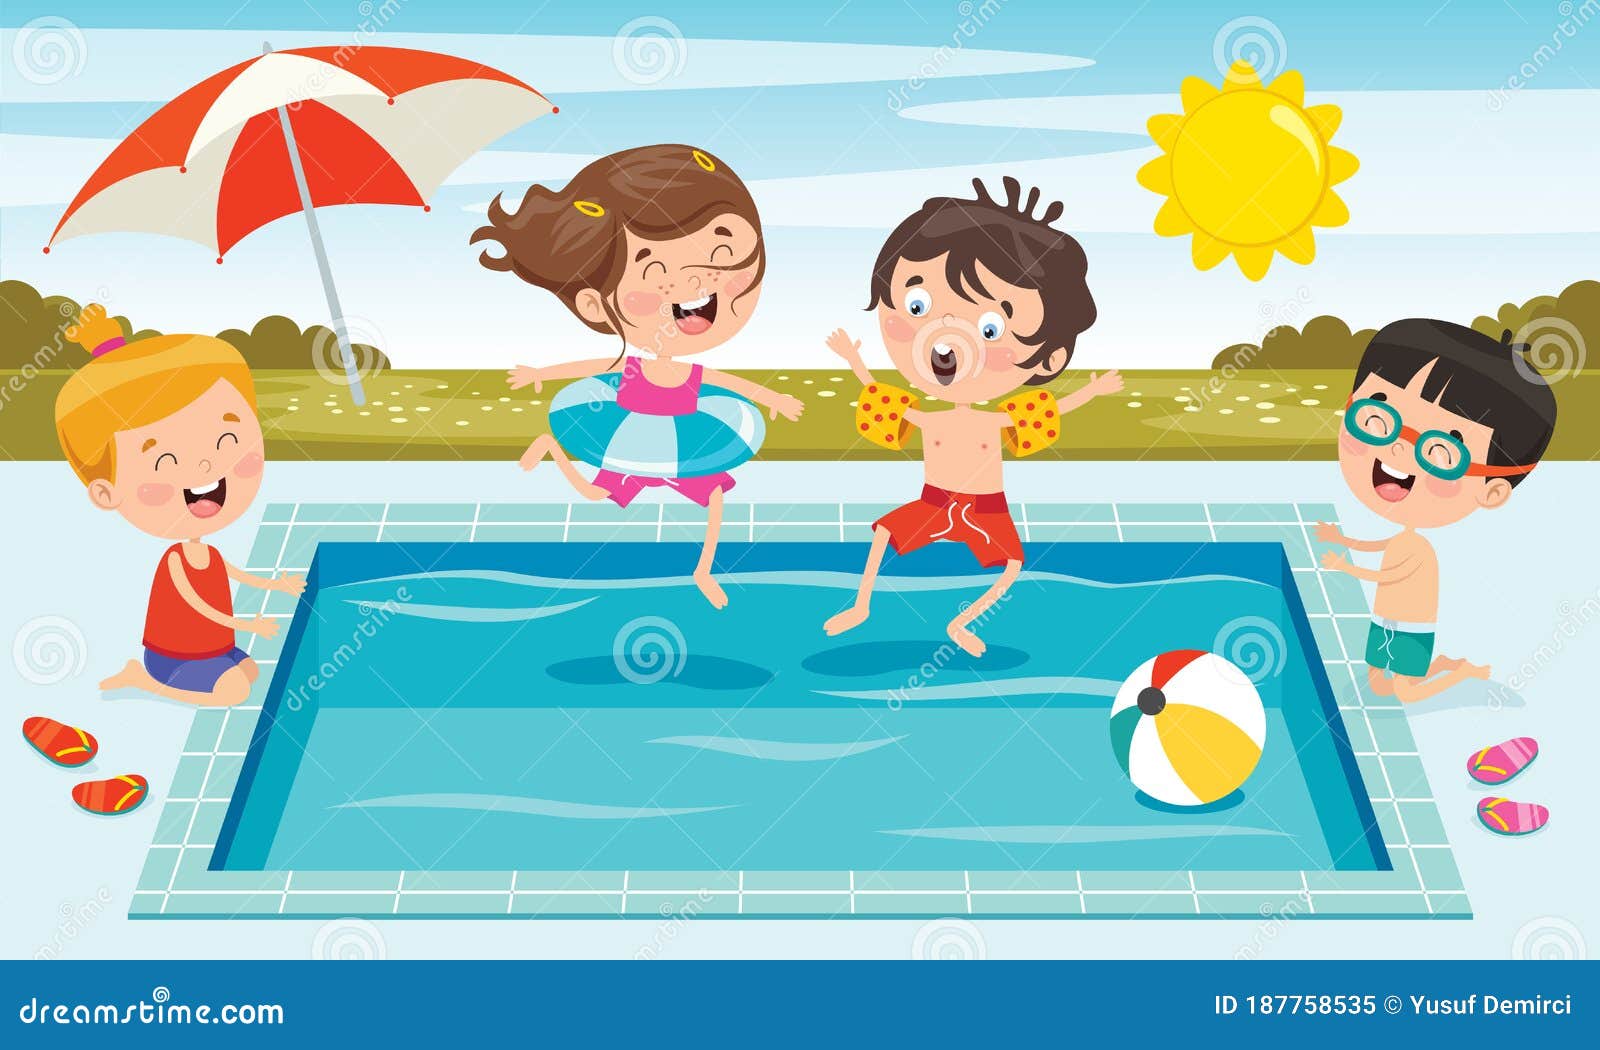 Cartoon Characters Jumping into Water Stock Vector - Illustration of ...